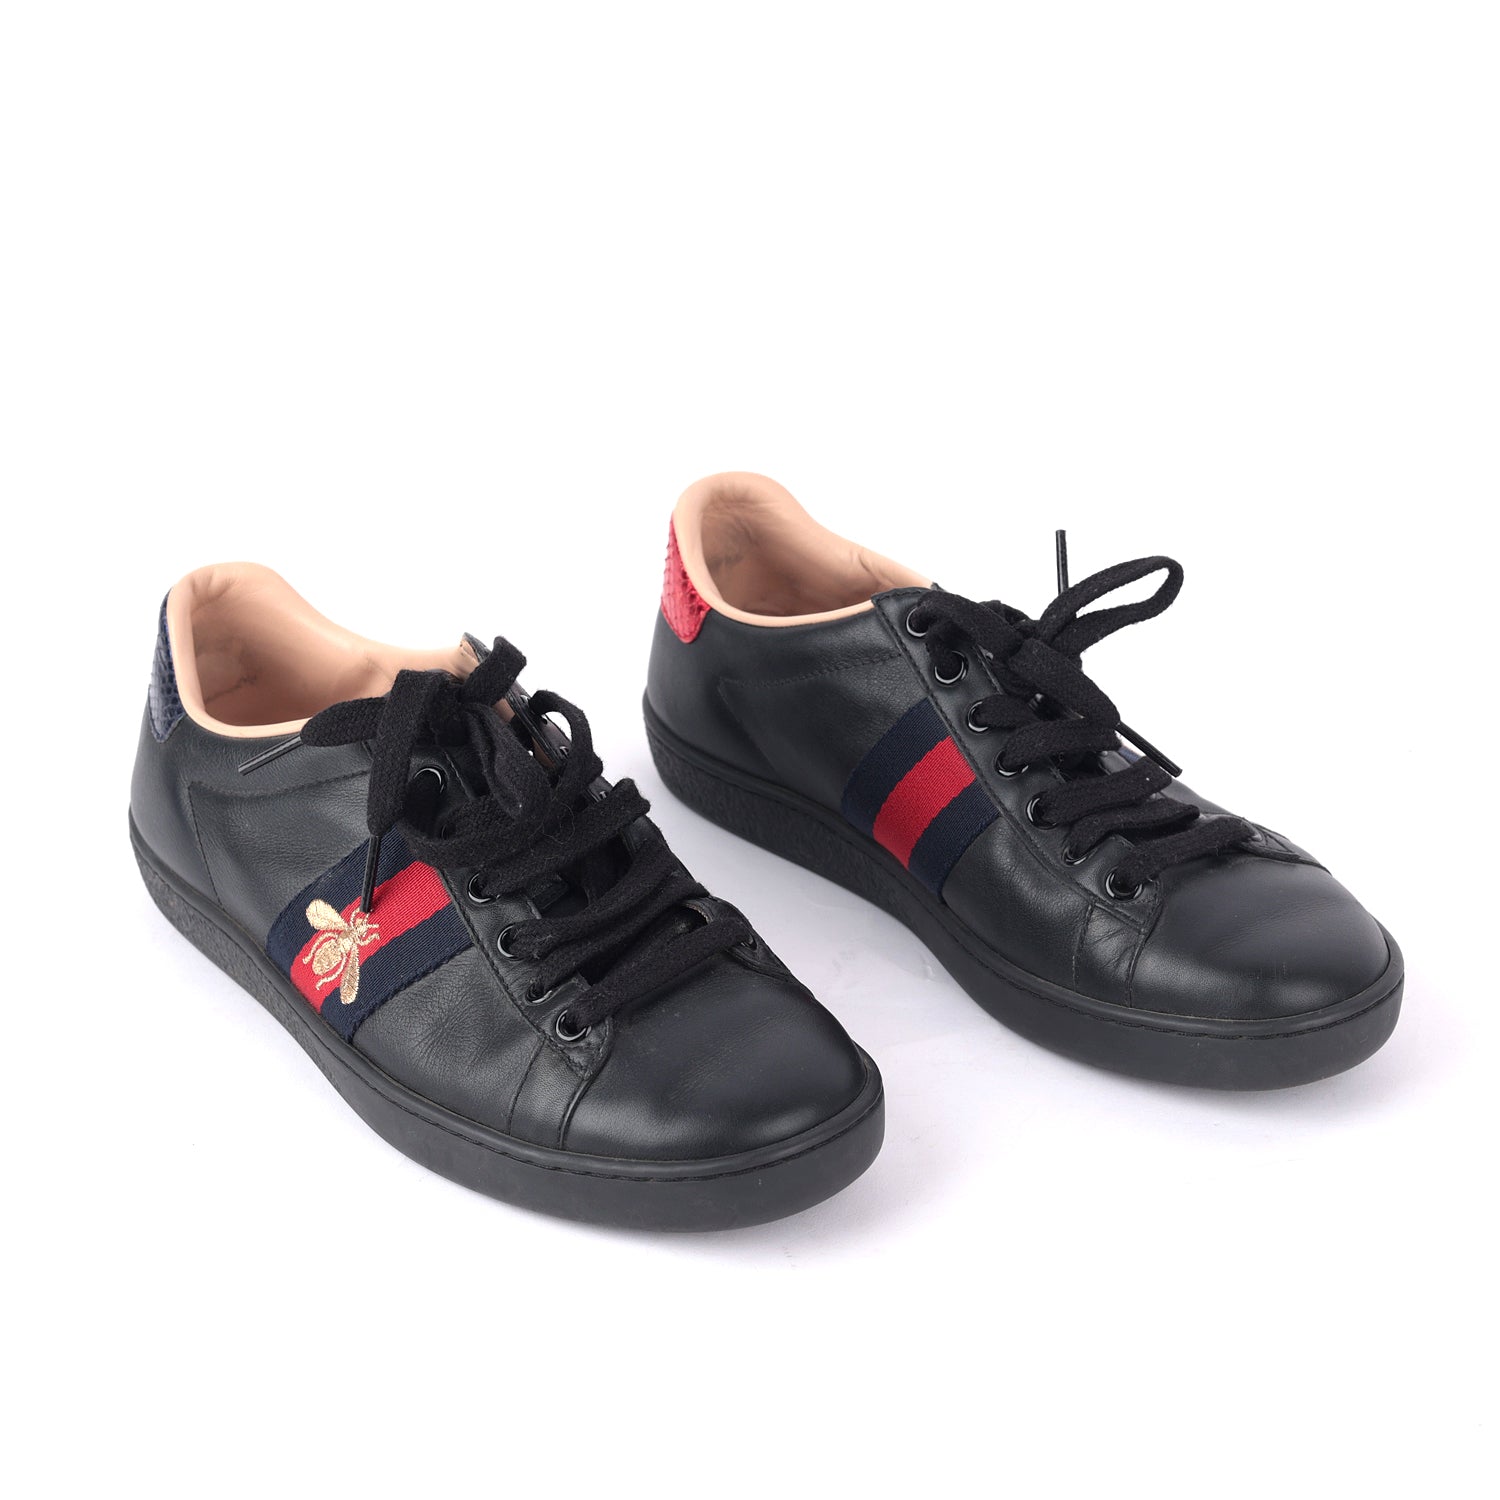 Gucci Leather Ace Bee Embroidered Sneakers